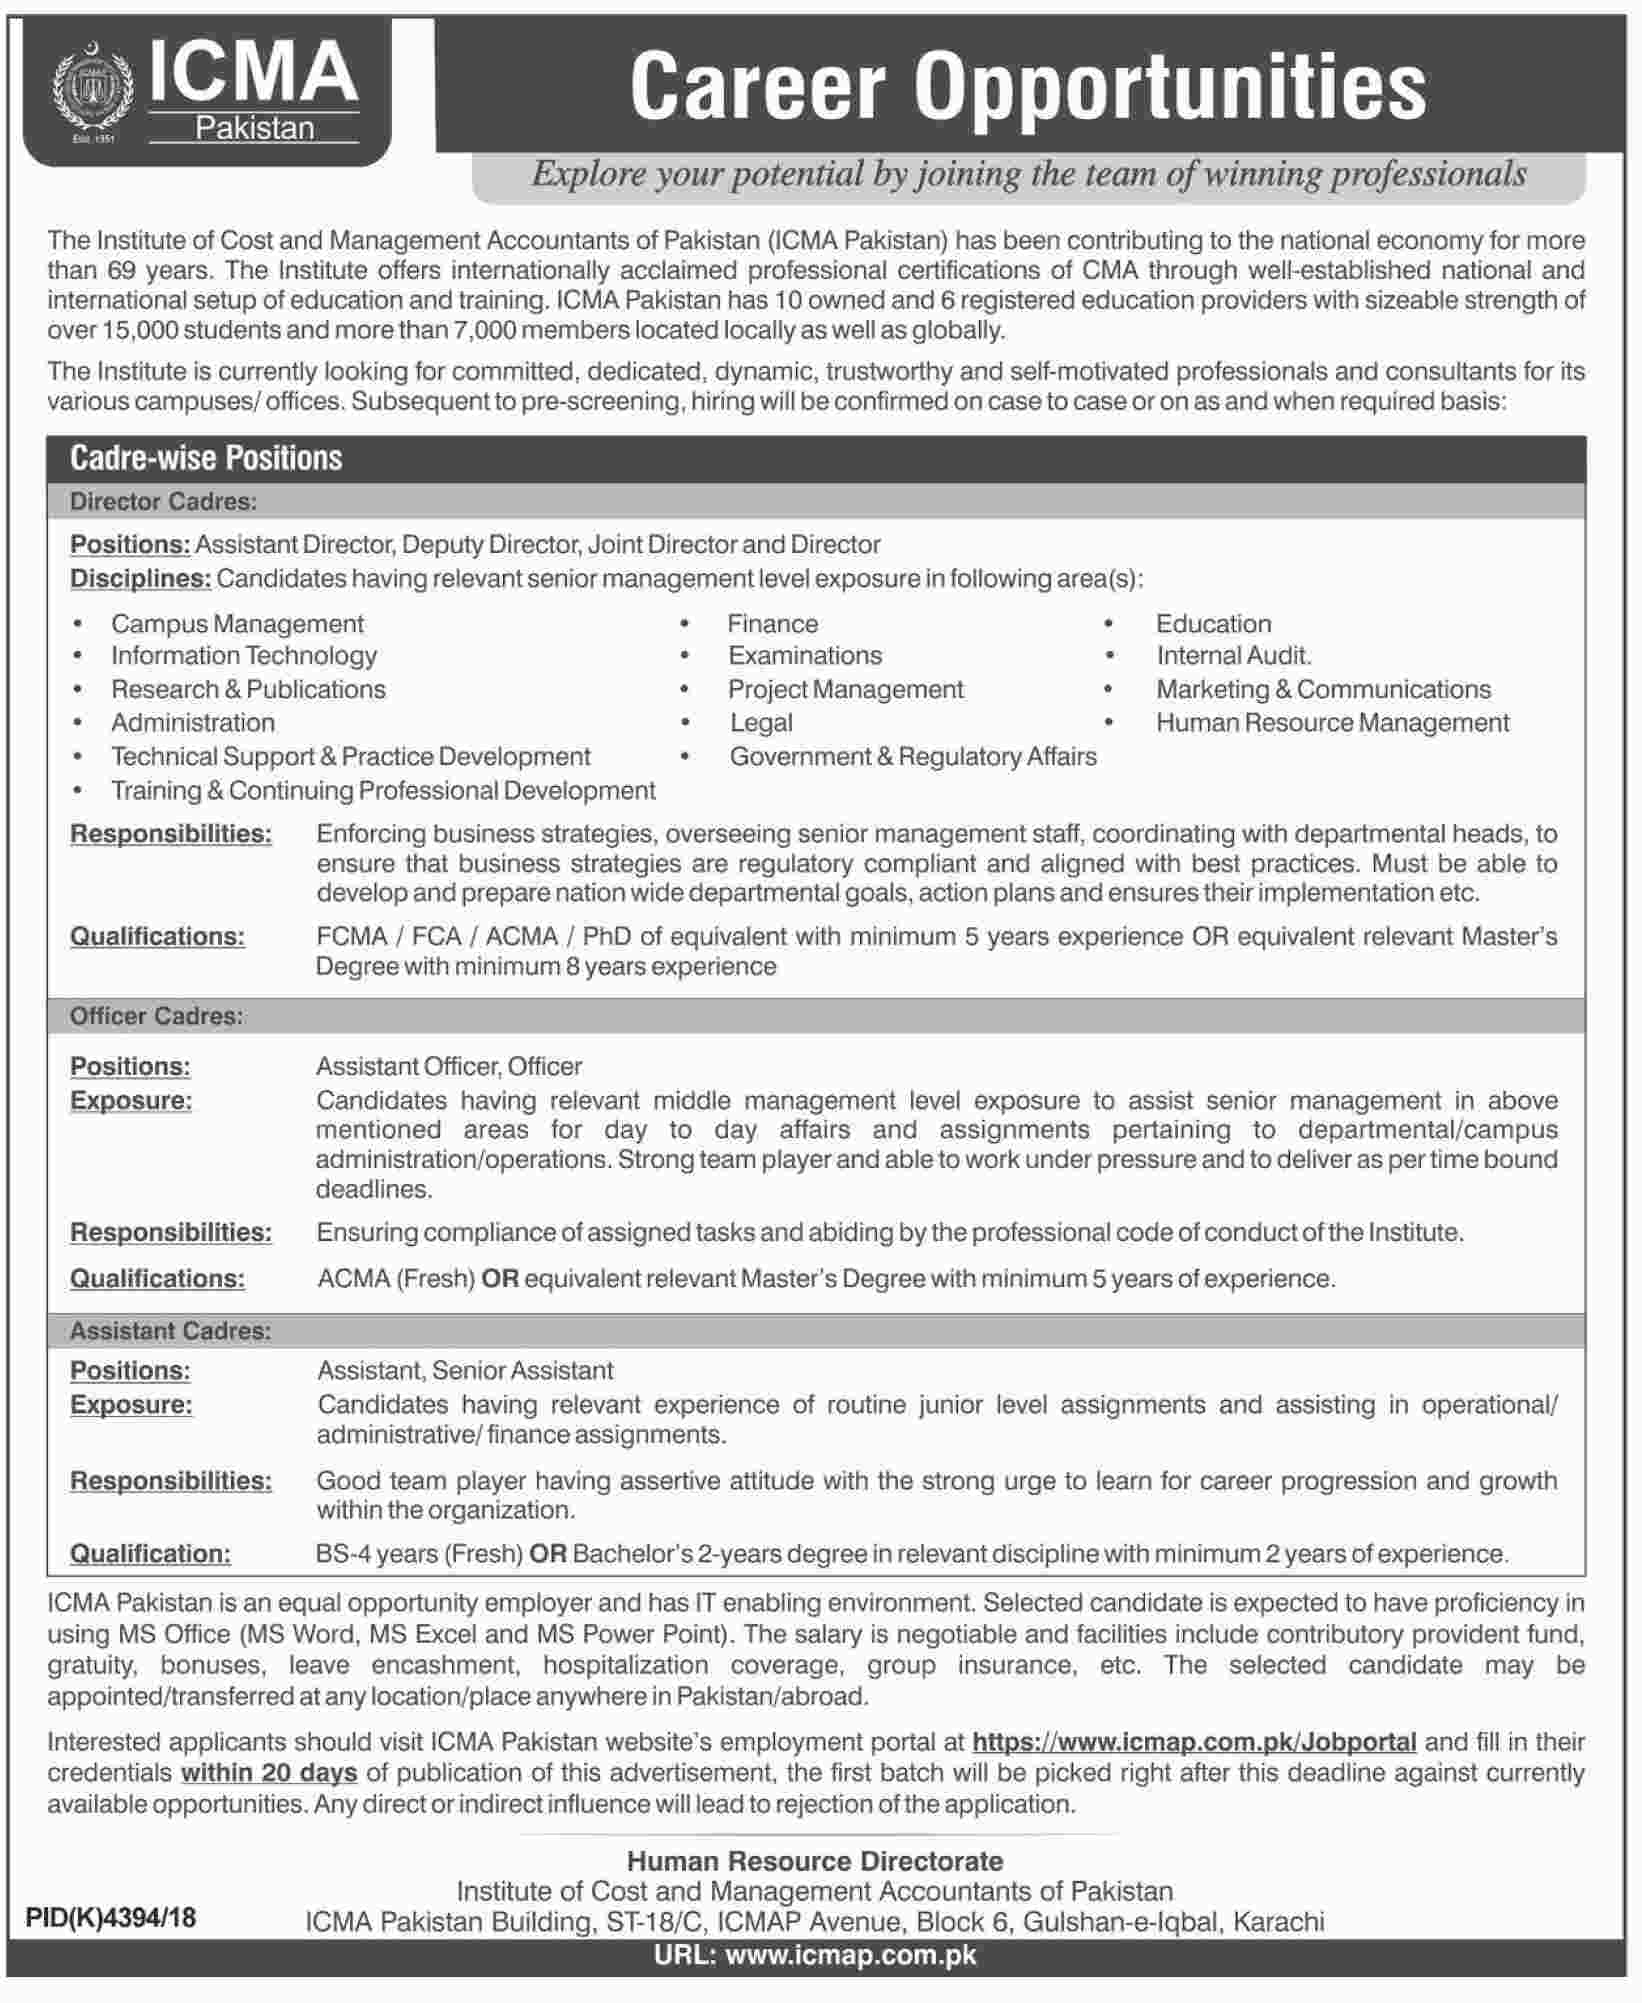 Institute of Cost and Management Accountants Pakistan Jobs 2019